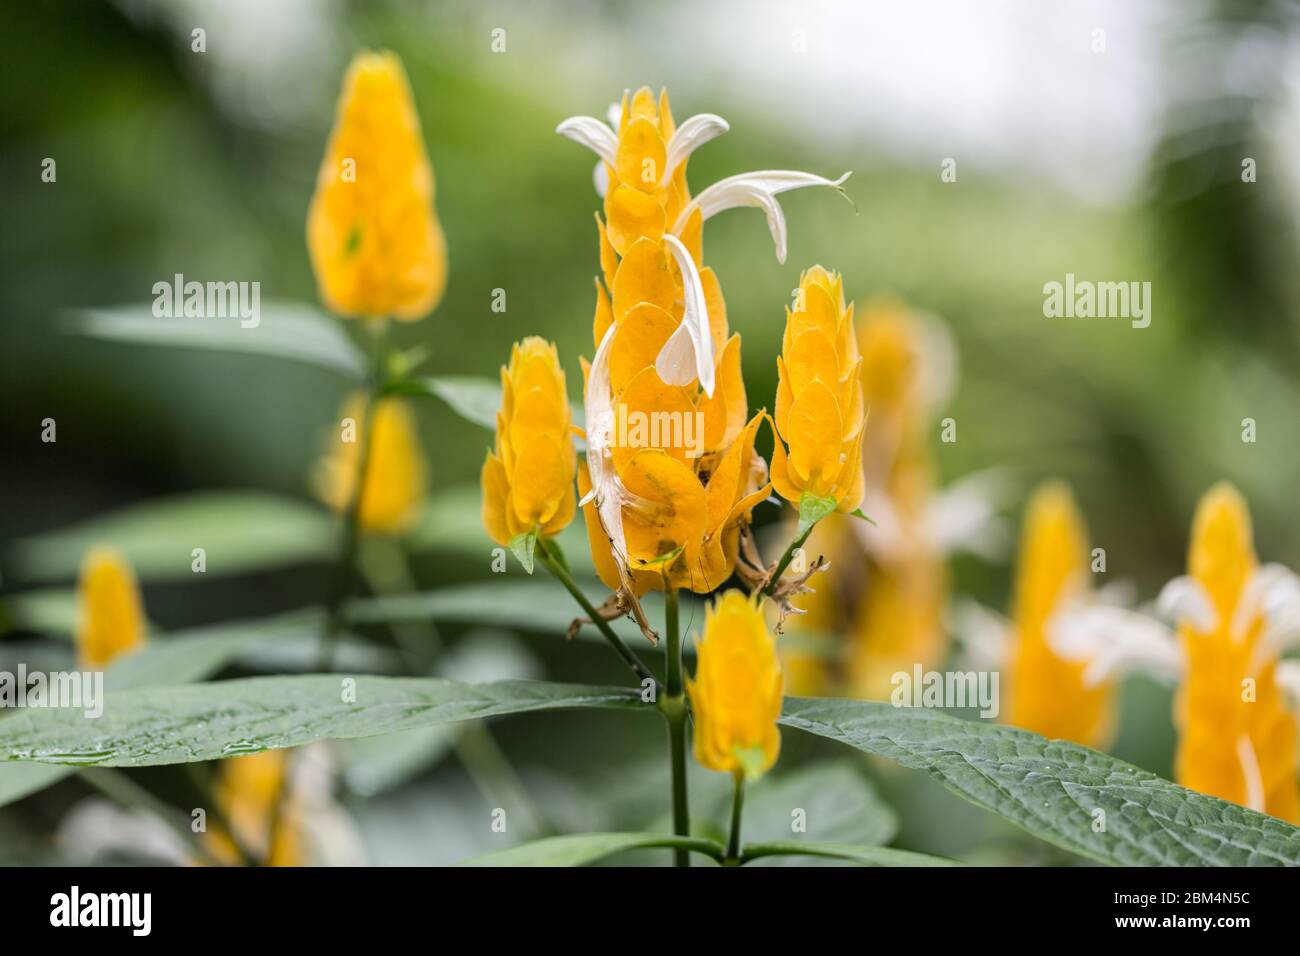 Close up / Macro of pachystachys lutea. Commonly known as lollipop plant and golden shrimp plant. White flowers emerging from yellow bracts. Stock Photo